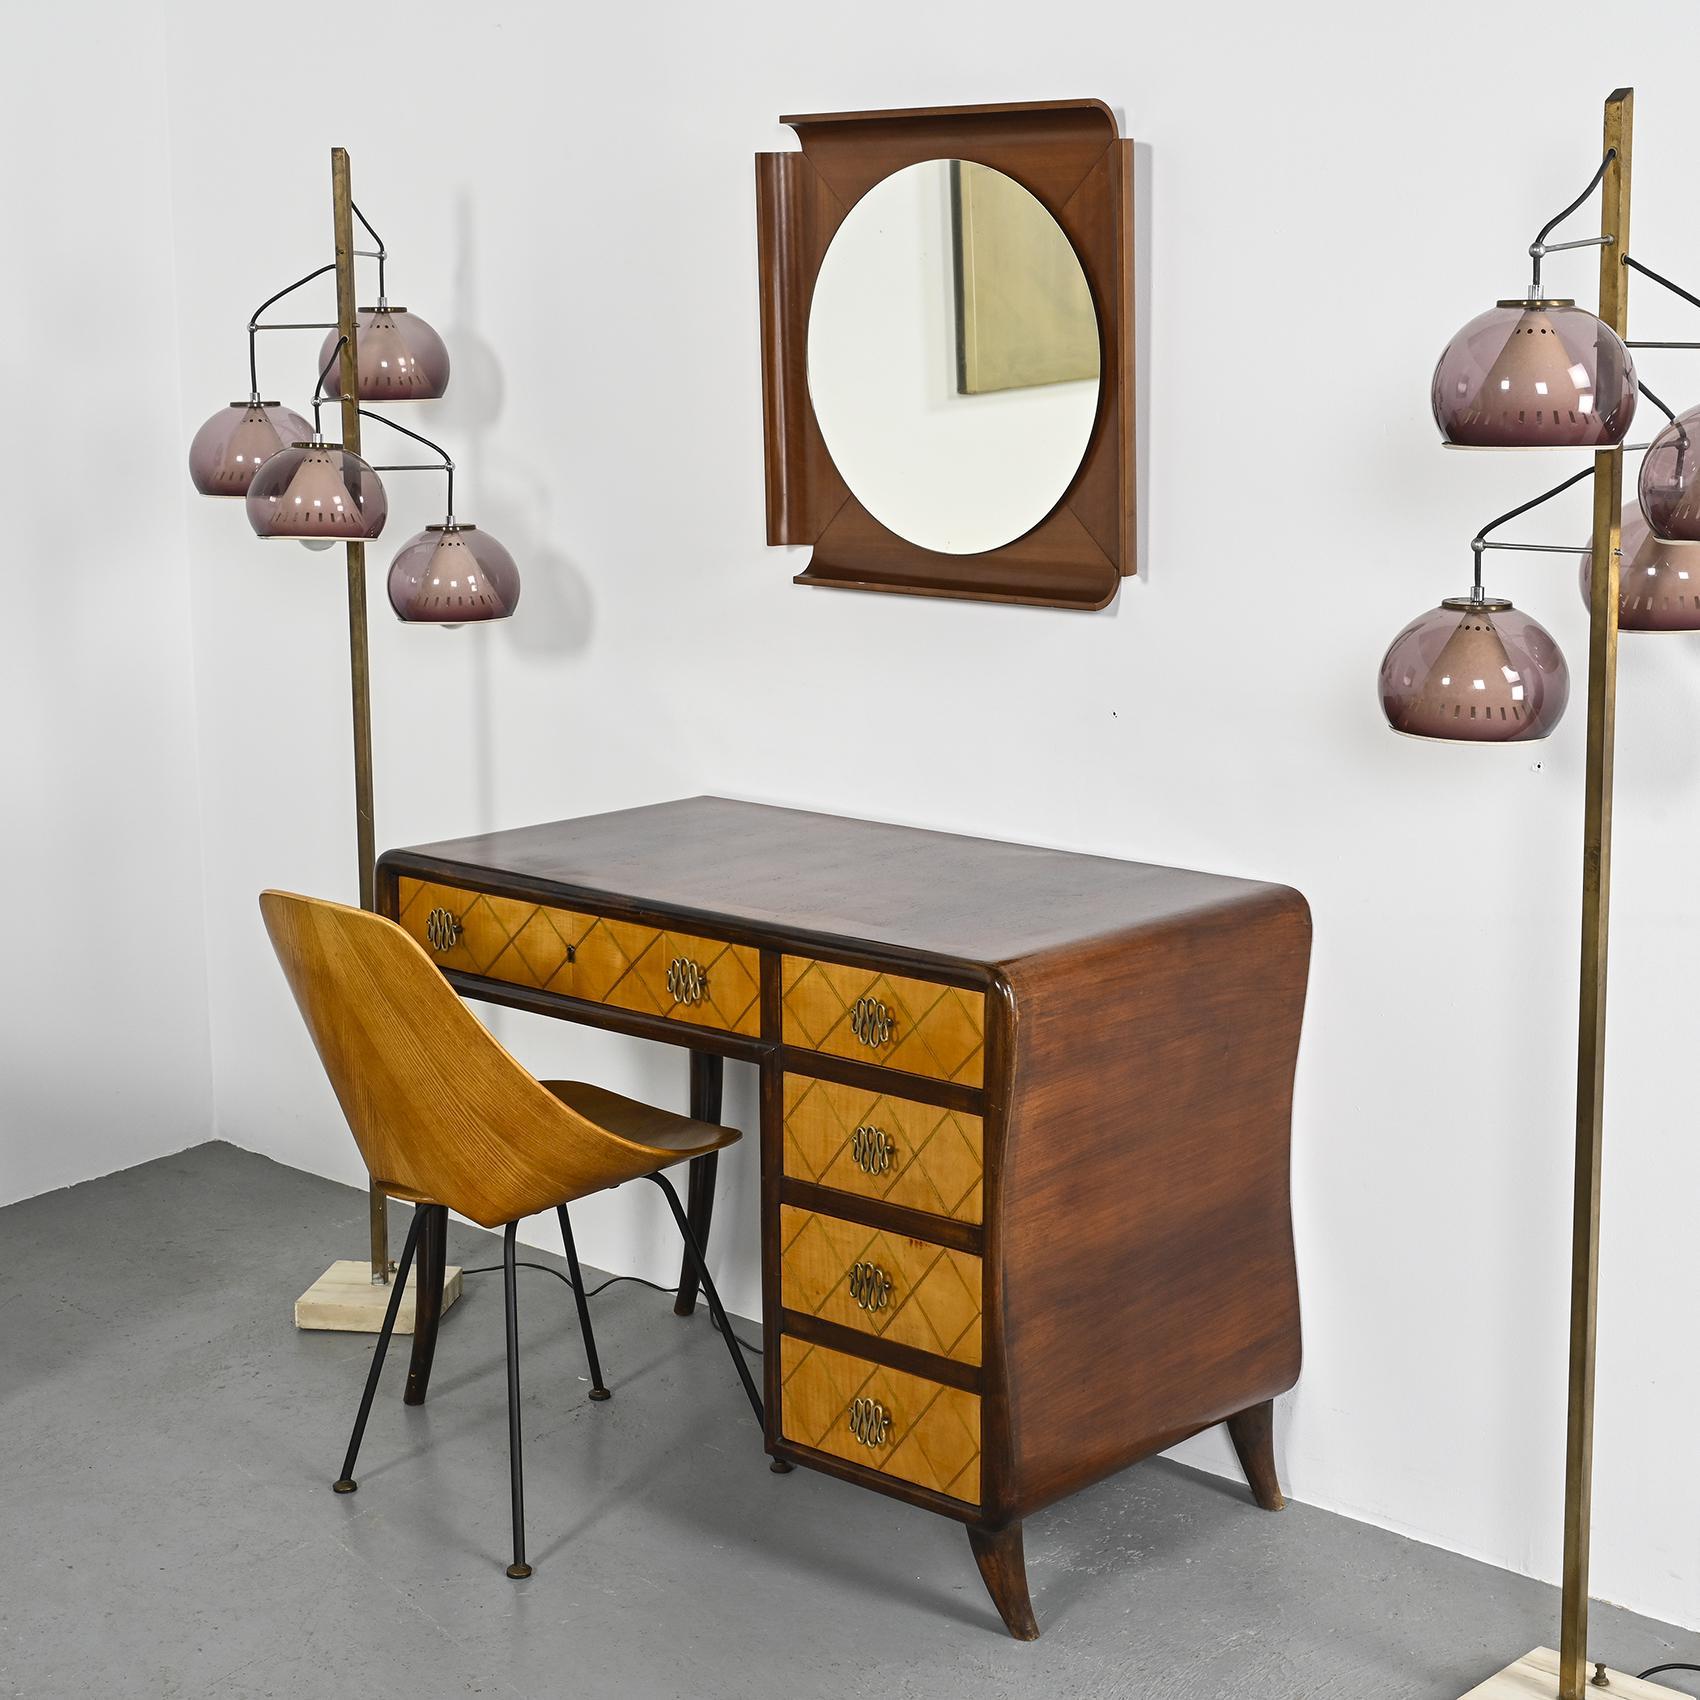 An Italian desk dating back to the 1940s and attributed to Osvaldo Borsani.

The entire structure, crafted from walnut-stained beech, elegantly rests on a curved base. It boasts five storage drawers with marquetry-adorned fronts. The captivating